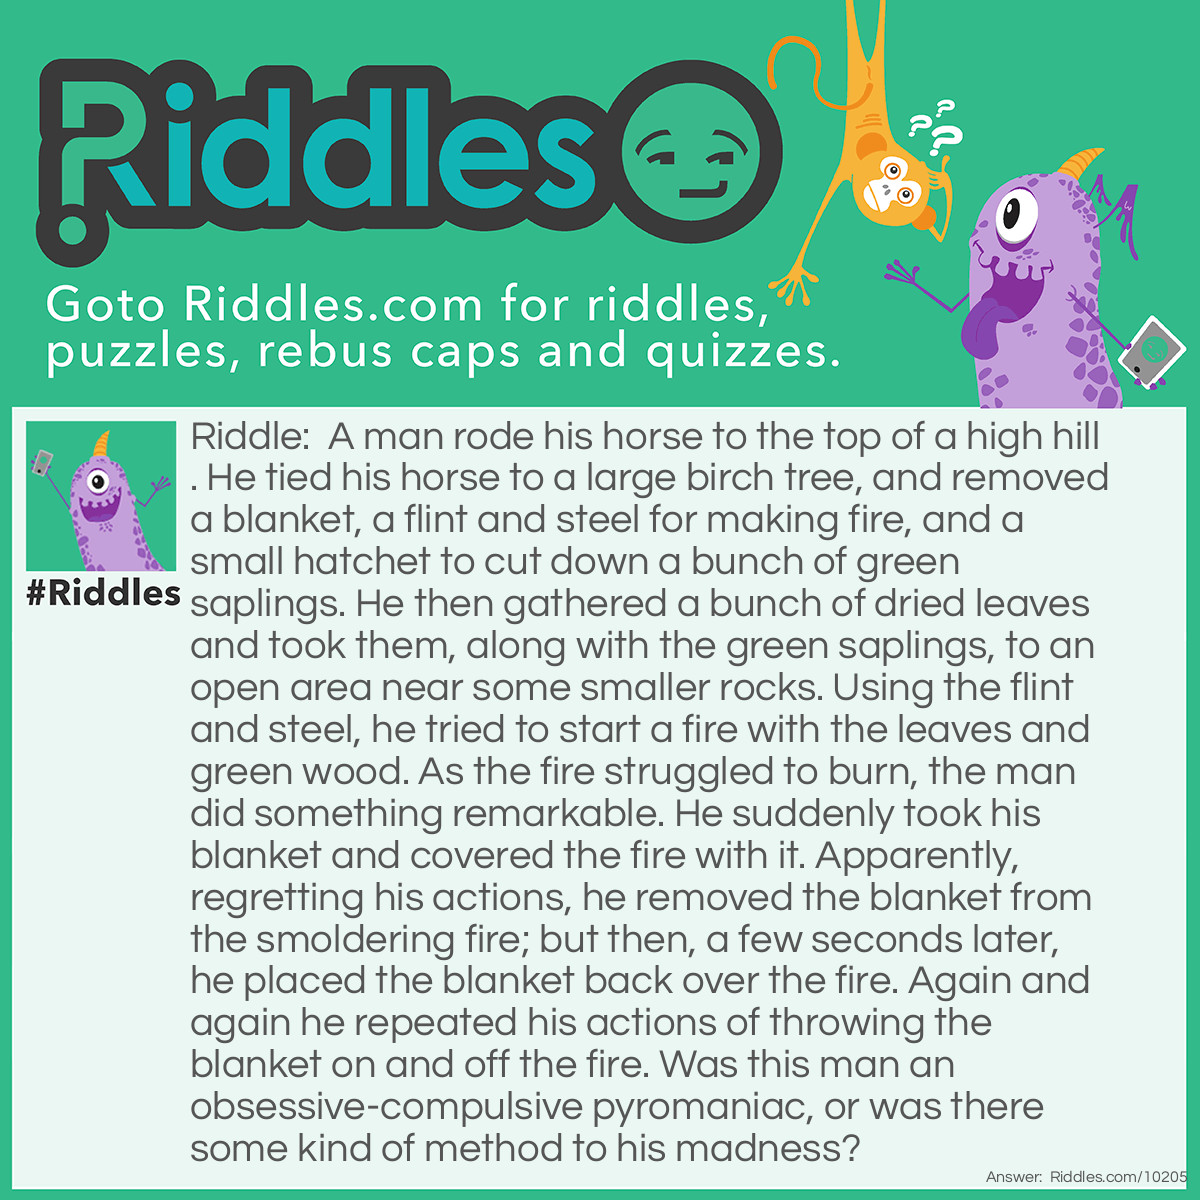 Riddle: A man rode his horse to the top of a high hill. He tied his horse to a large birch tree, and removed a blanket, a flint and steel for making fire, and a small hatchet to cut down a bunch of green saplings. He then gathered a bunch of dried leaves and took them, along with the green saplings, to an open area near some smaller rocks. Using the flint and steel, he tried to start a fire with the leaves and green wood. As the fire struggled to burn, the man did something remarkable. He suddenly took his blanket and covered the fire with it. Apparently, regretting his actions, he removed the blanket from the smoldering fire; but then, a few seconds later, he placed the blanket back over the fire. Again and again he repeated his actions of throwing the blanket on and off the fire. Was this man an obsessive-compulsive pyromaniac, or was there some kind of method to his madness? Answer: The man was a Native American Indian in the old West who was sending smoke signals to his tribe.